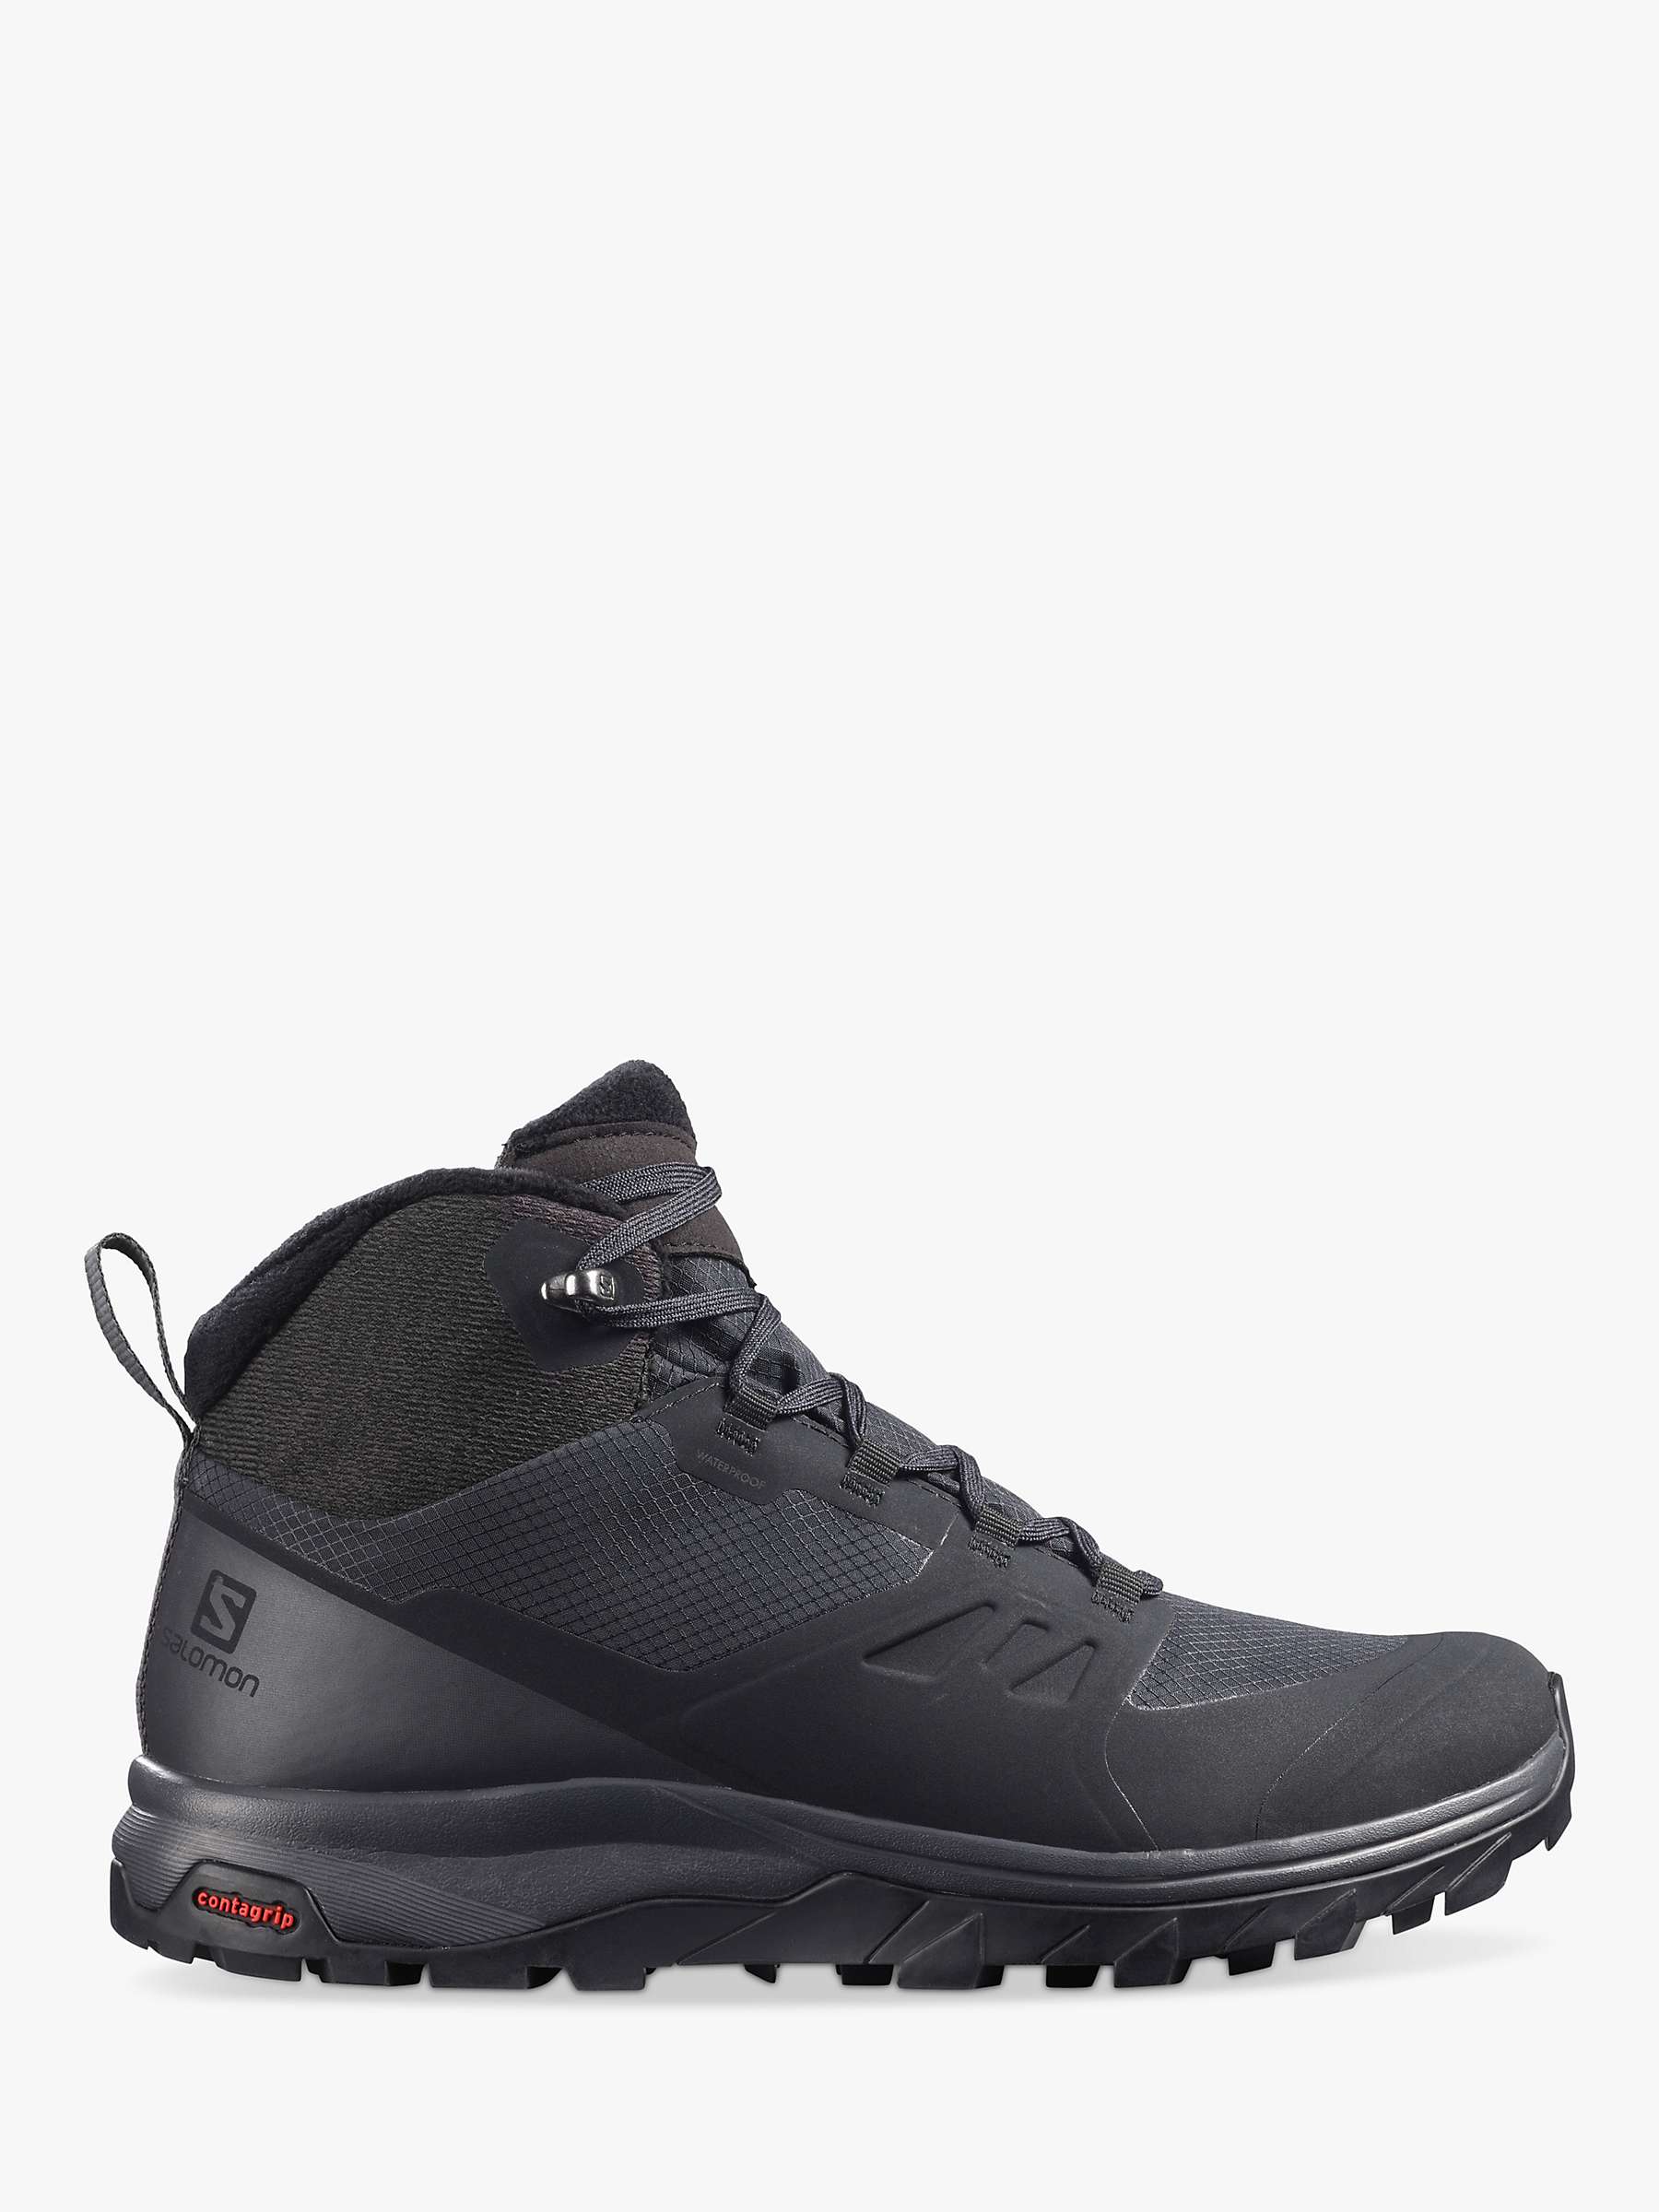 Buy Salomon OUTsnap CSWP Women's Hiking Boots Online at johnlewis.com